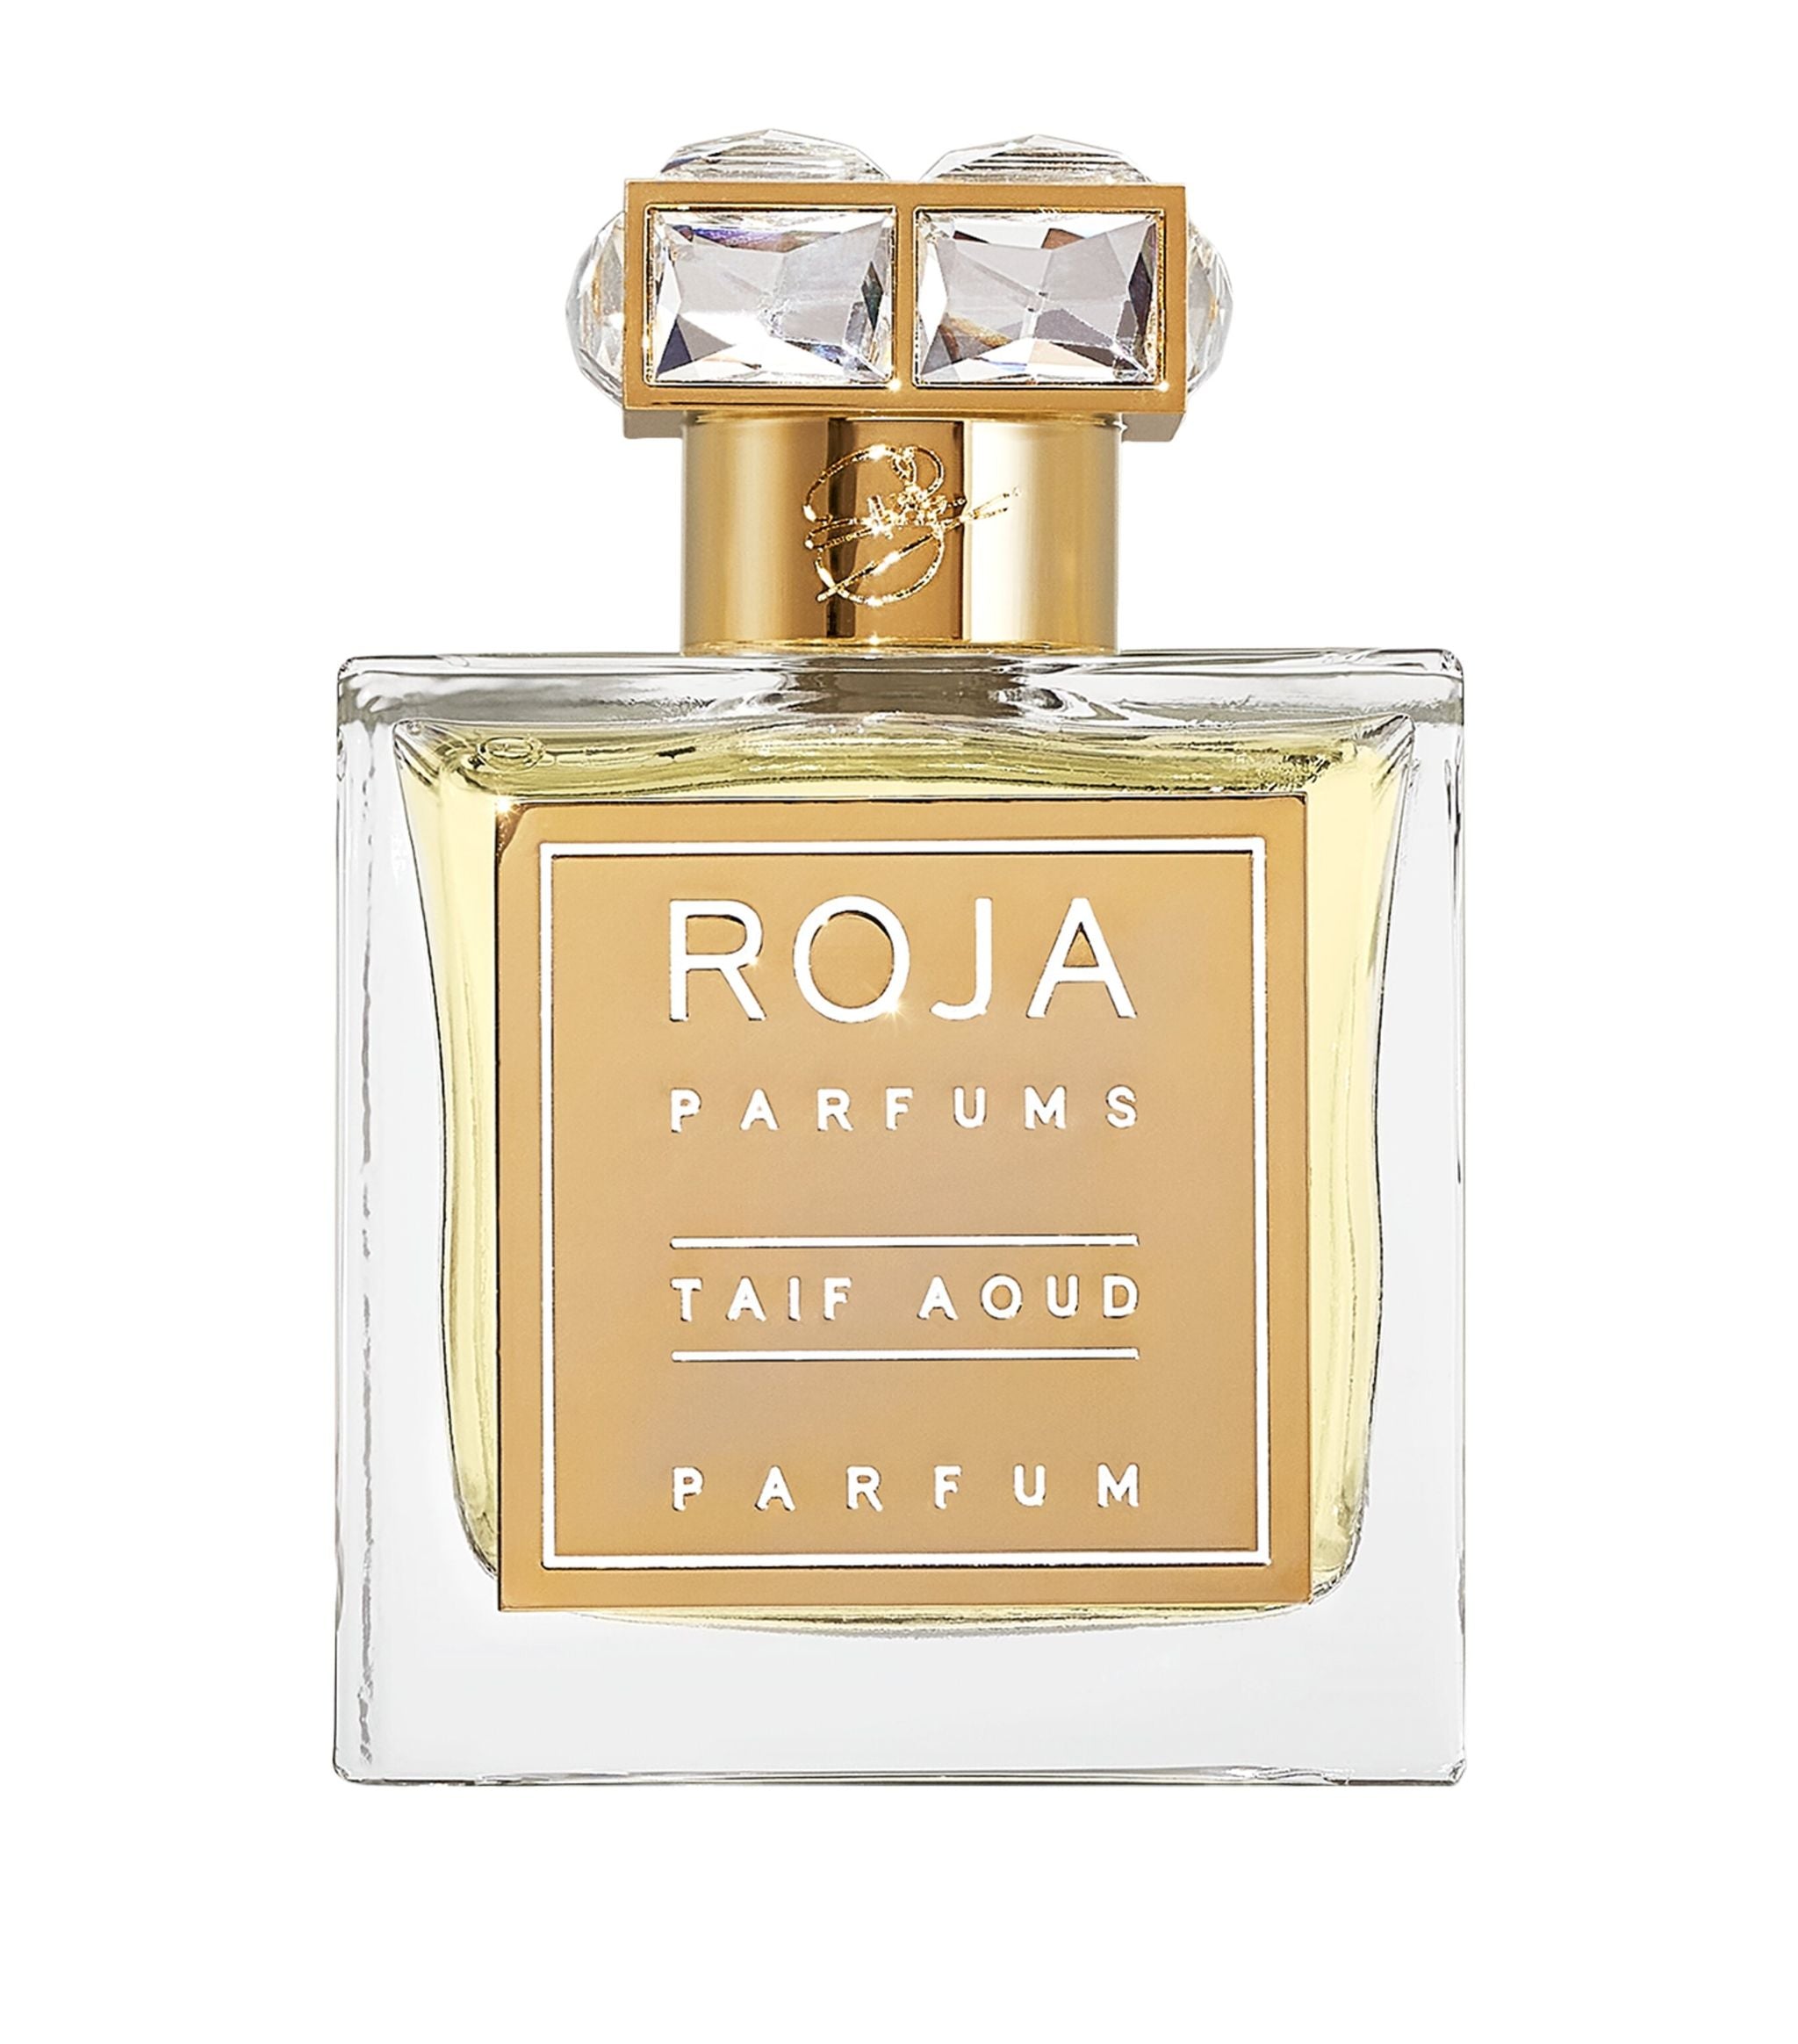 Taif Aoud Parfum (100ml) Perfumes, Aftershaves & Gift Sets Harrods   